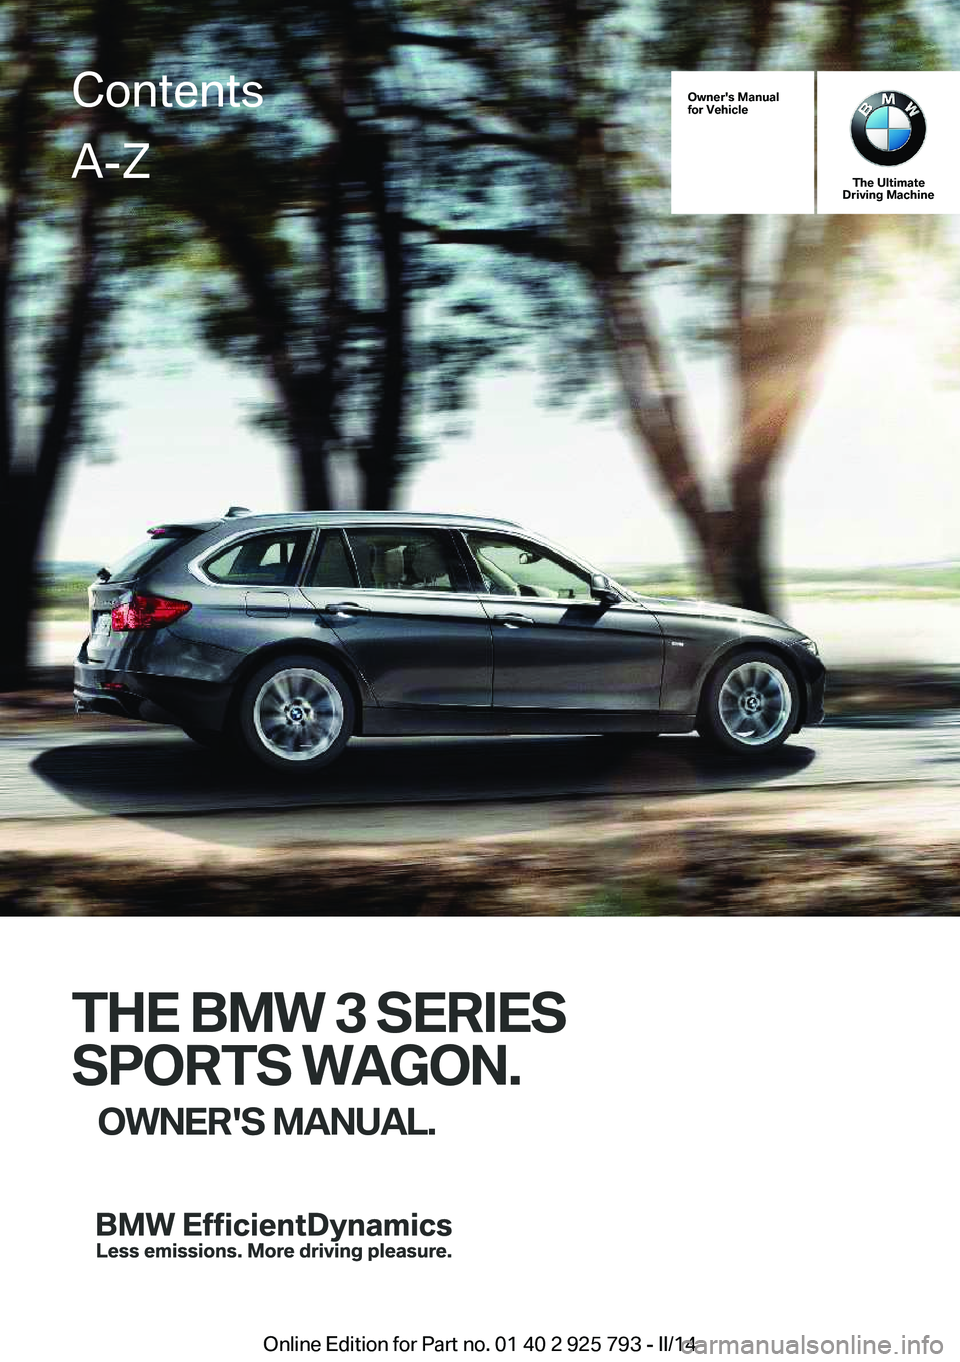 BMW 328D XDRIVE SPORTS WAGON 2014  Owners Manual Owner's Manual
for Vehicle
The Ultimate
Driving Machine
THE BMW 3 SERIES
SPORTS WAGON. OWNER'S MANUAL.
ContentsA-Z
Online Edition for Part no. 01 40 2 925 793 - II/14   